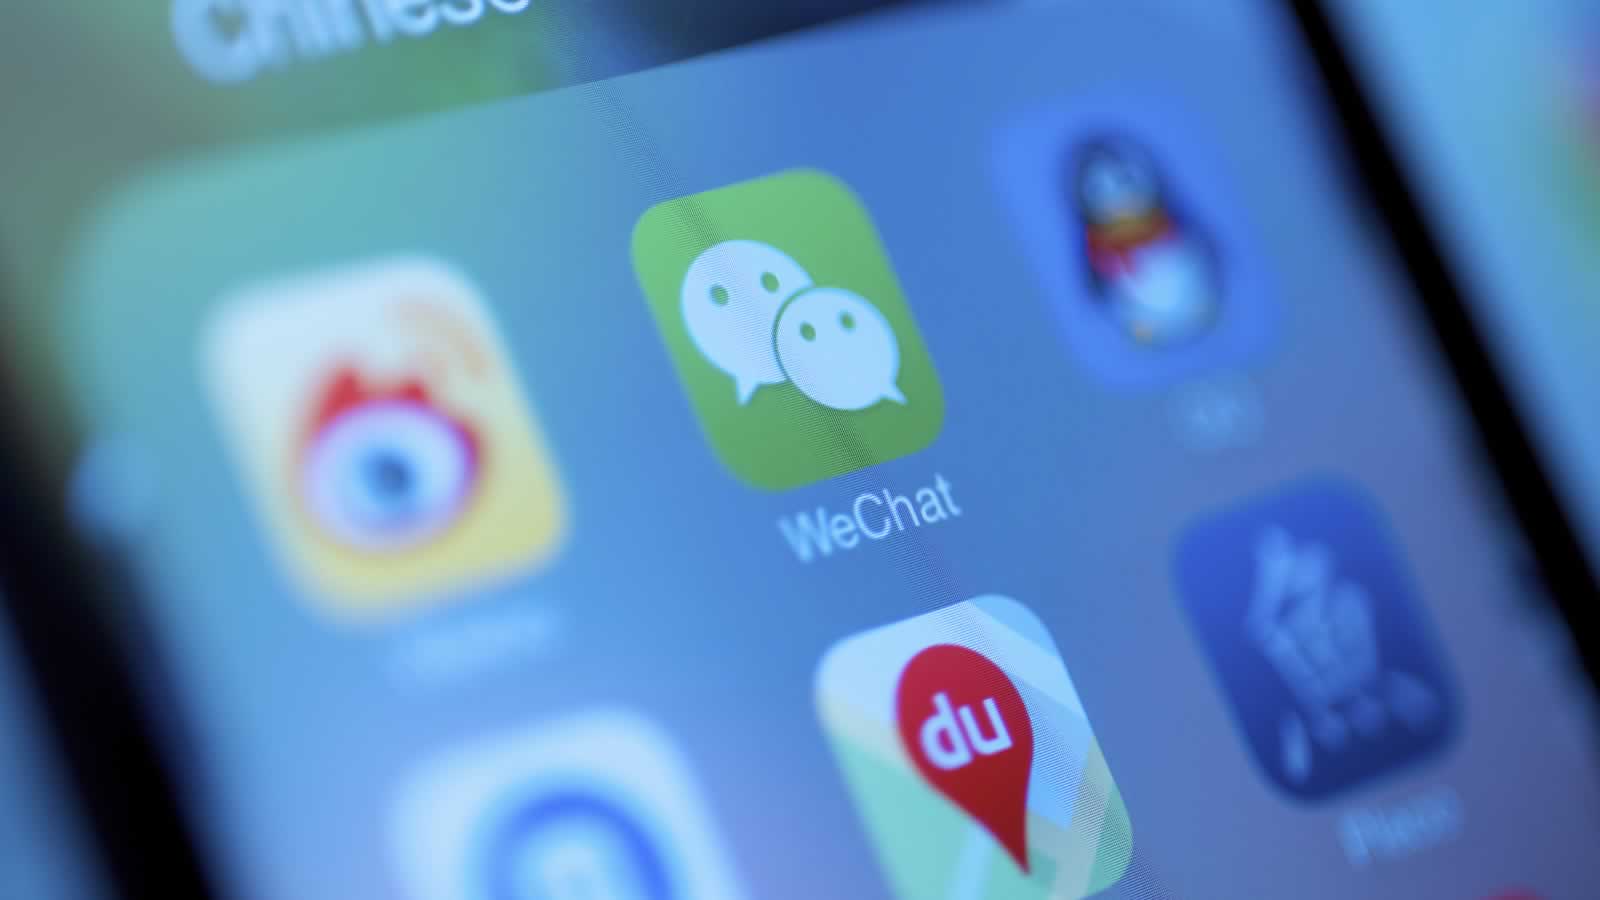 Wechat Now Has Over 1 Billion Active Monthly Users Worldwide